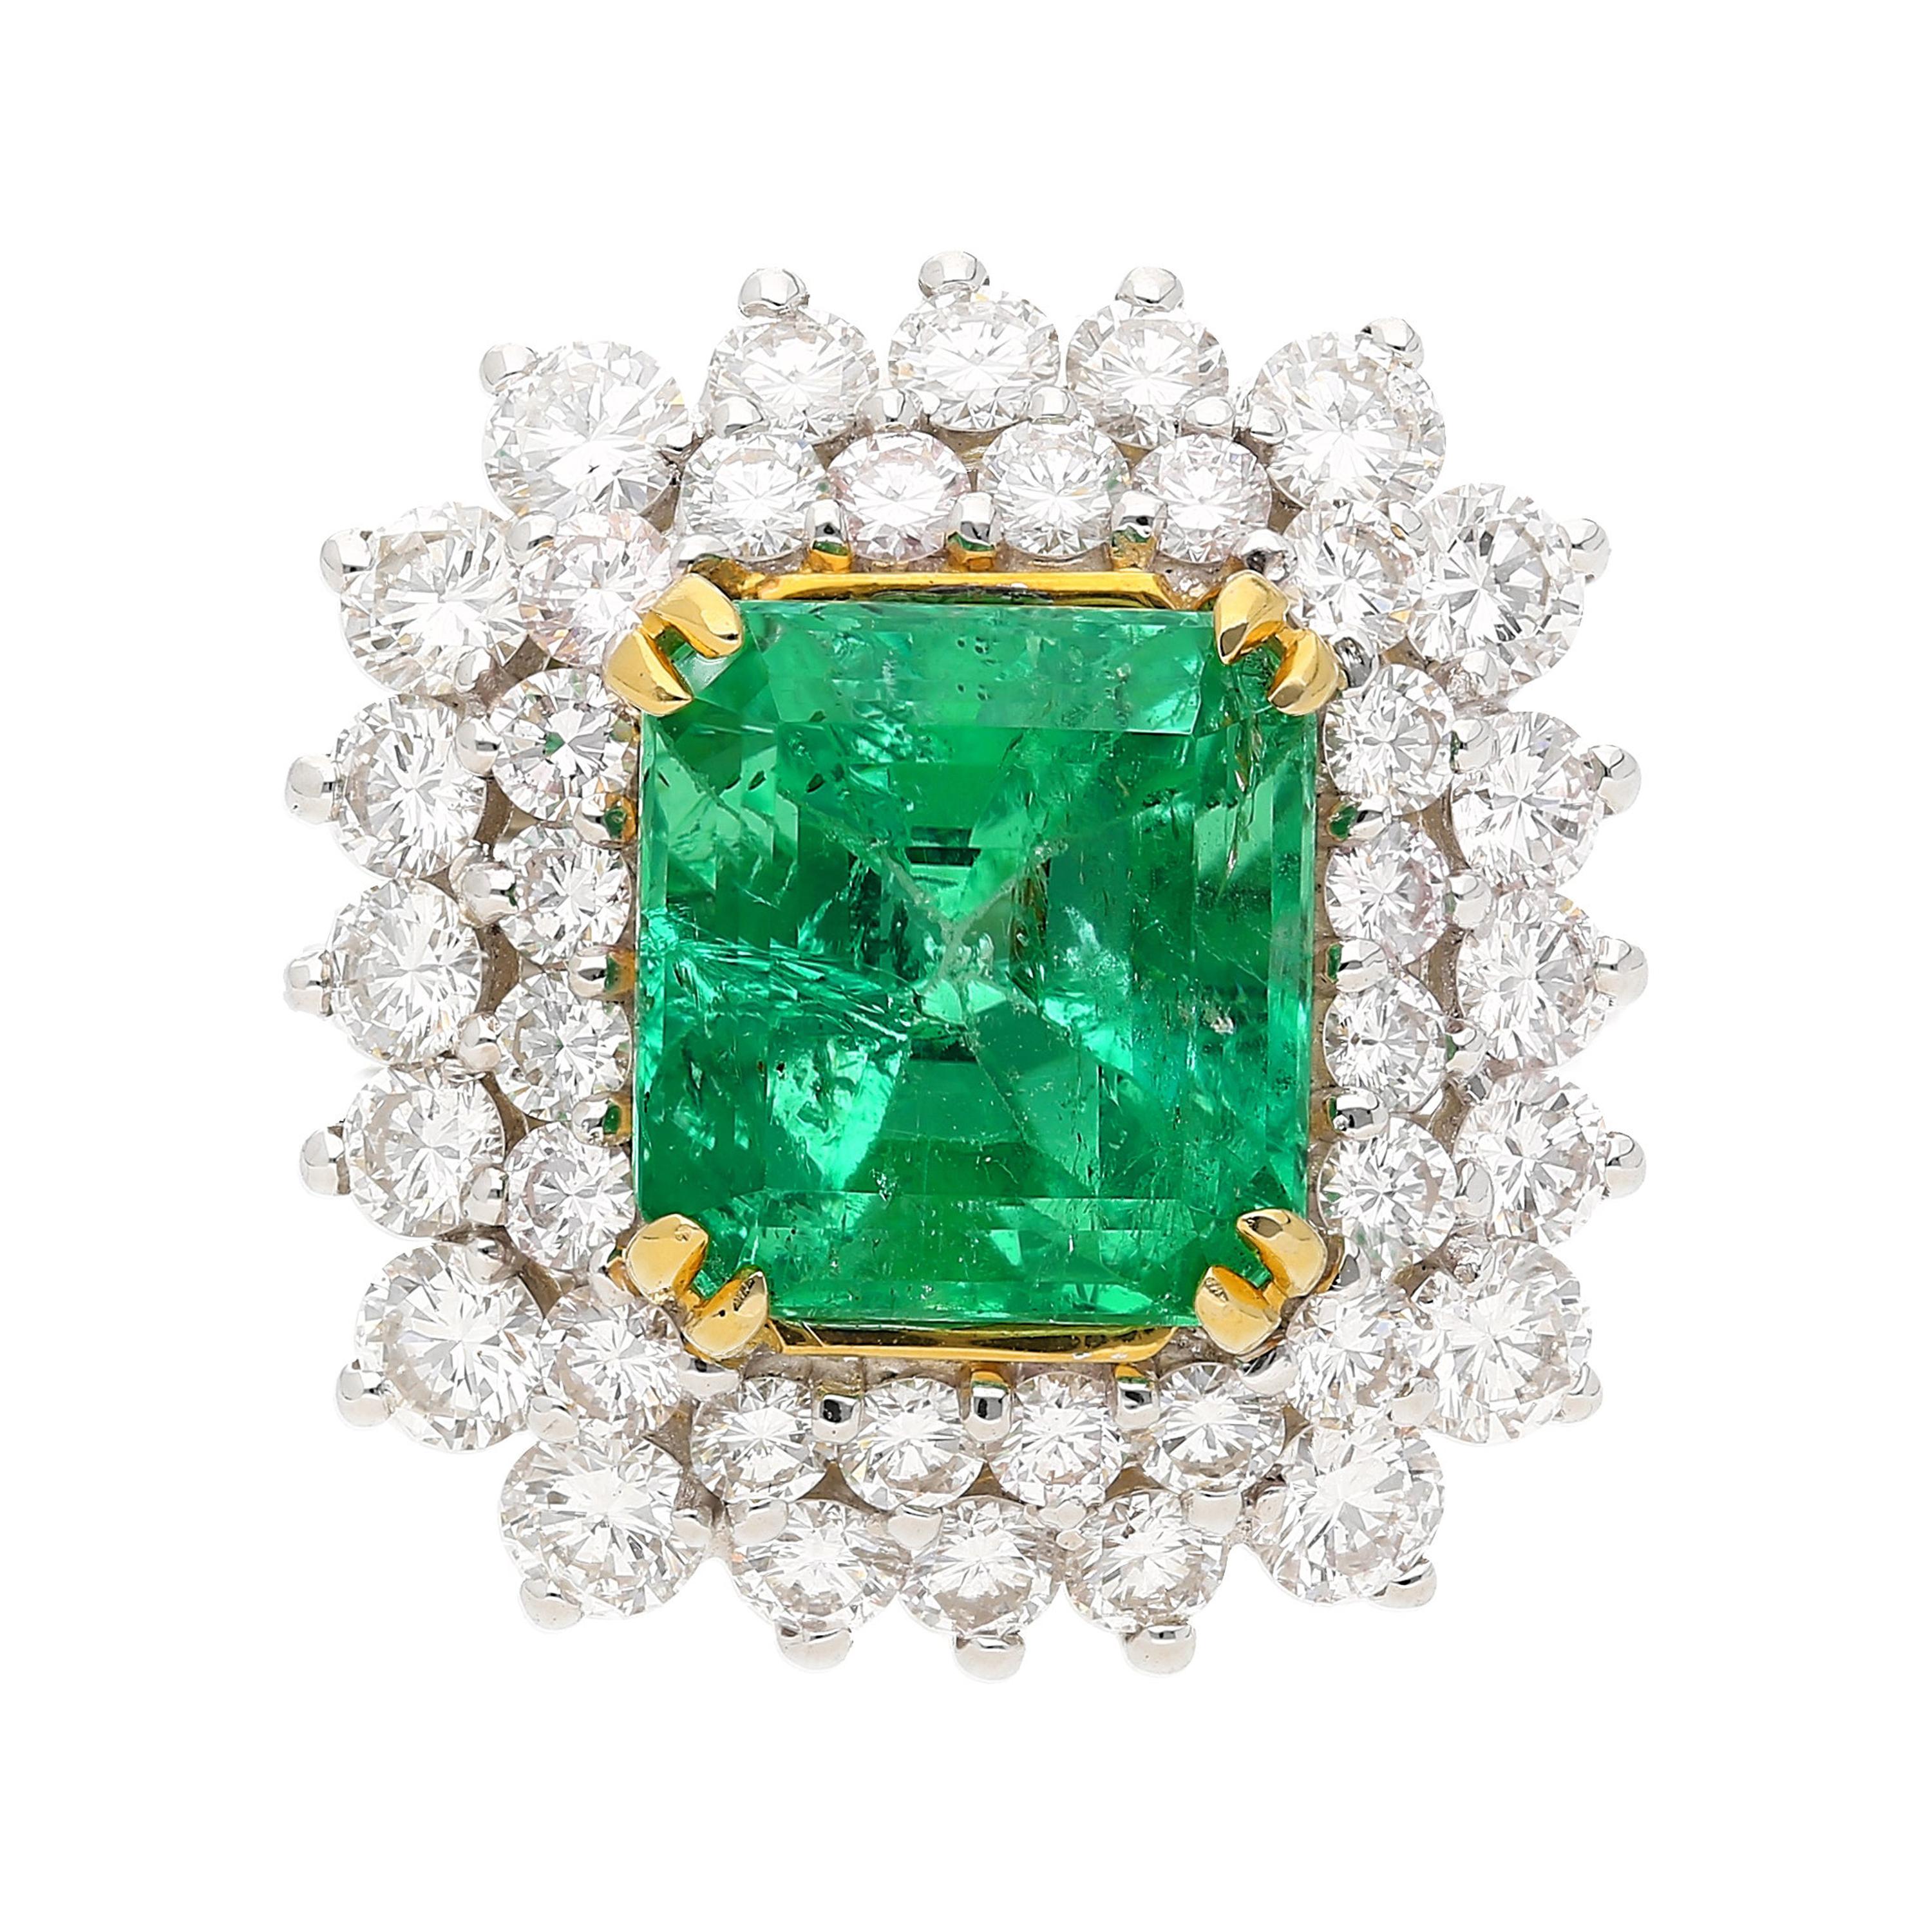 4.30 Carat Emerald-Cut Colombian Emerald Insignificant Oil GRS and Diamond Ring